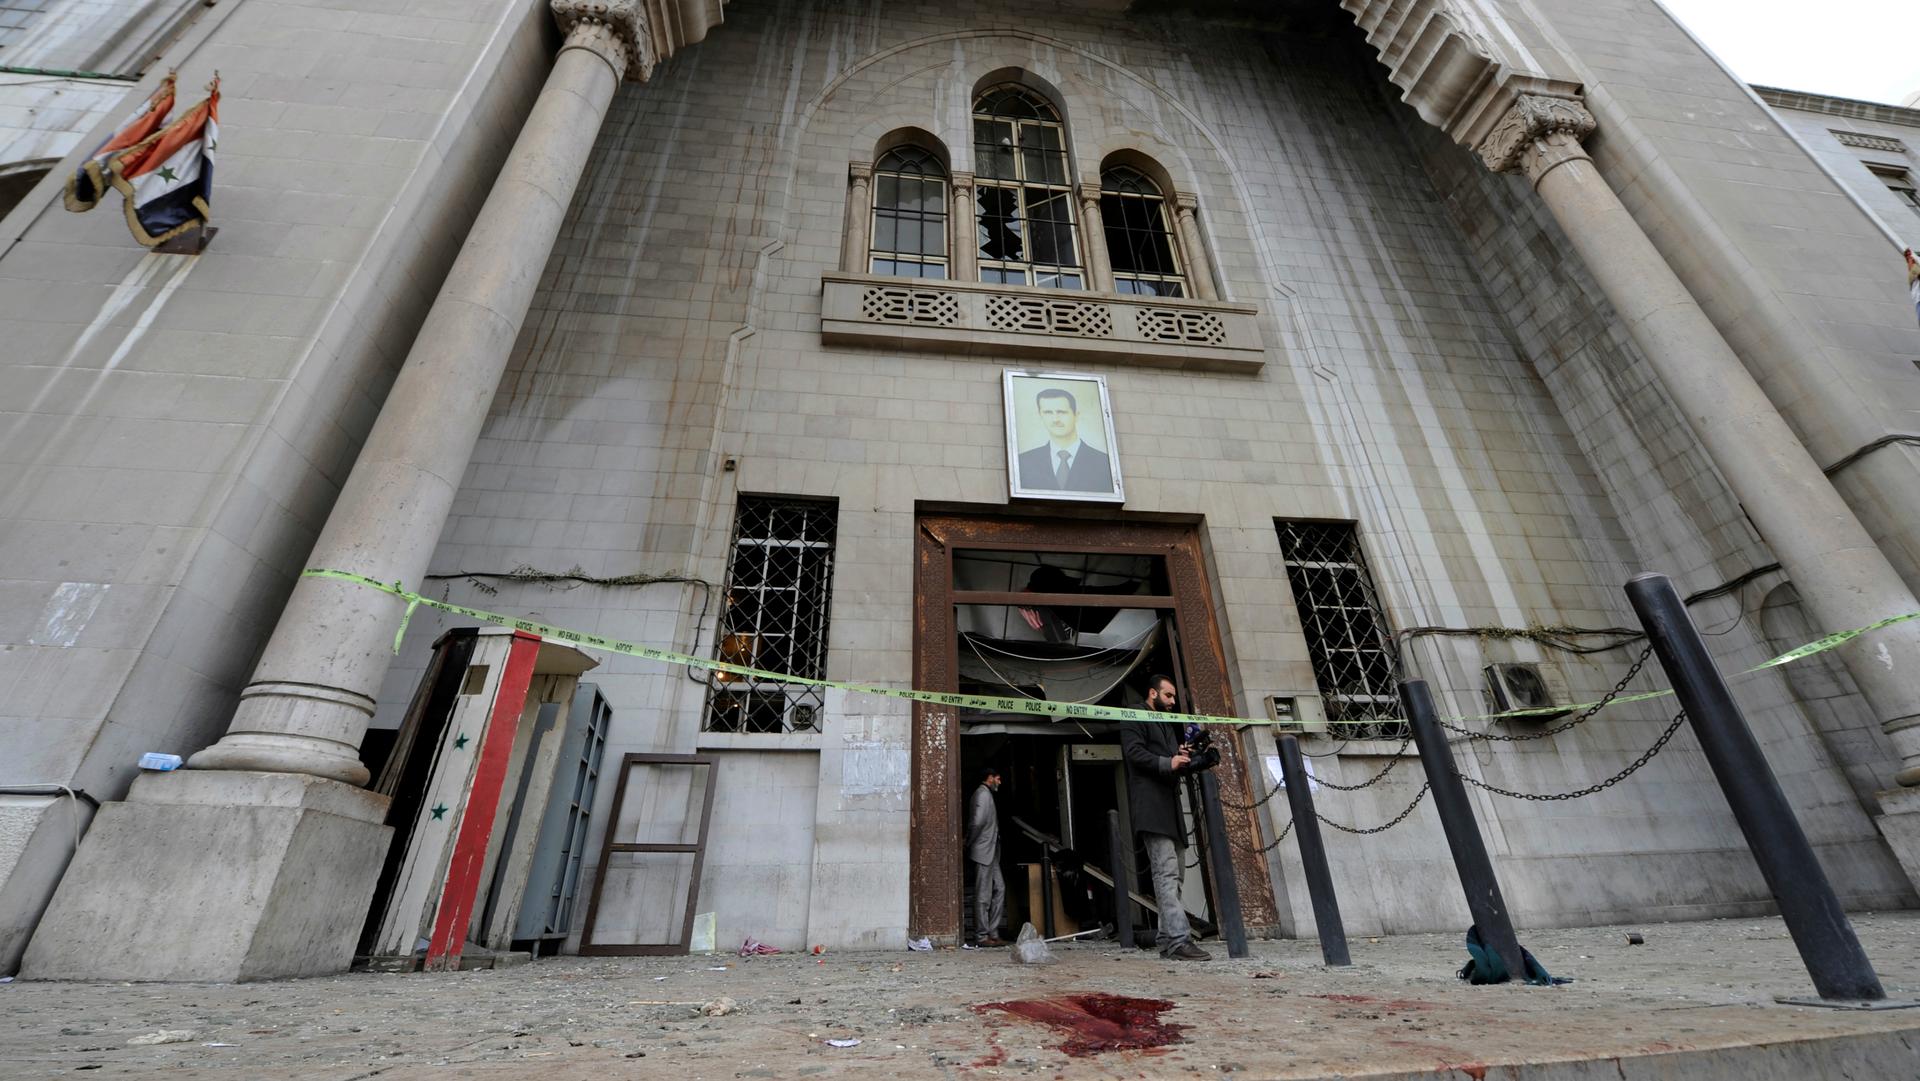 The entrance of the Palace of Justice in Damascus, Syria, after a suicide bomber killed dozens there on March 15, 2017.